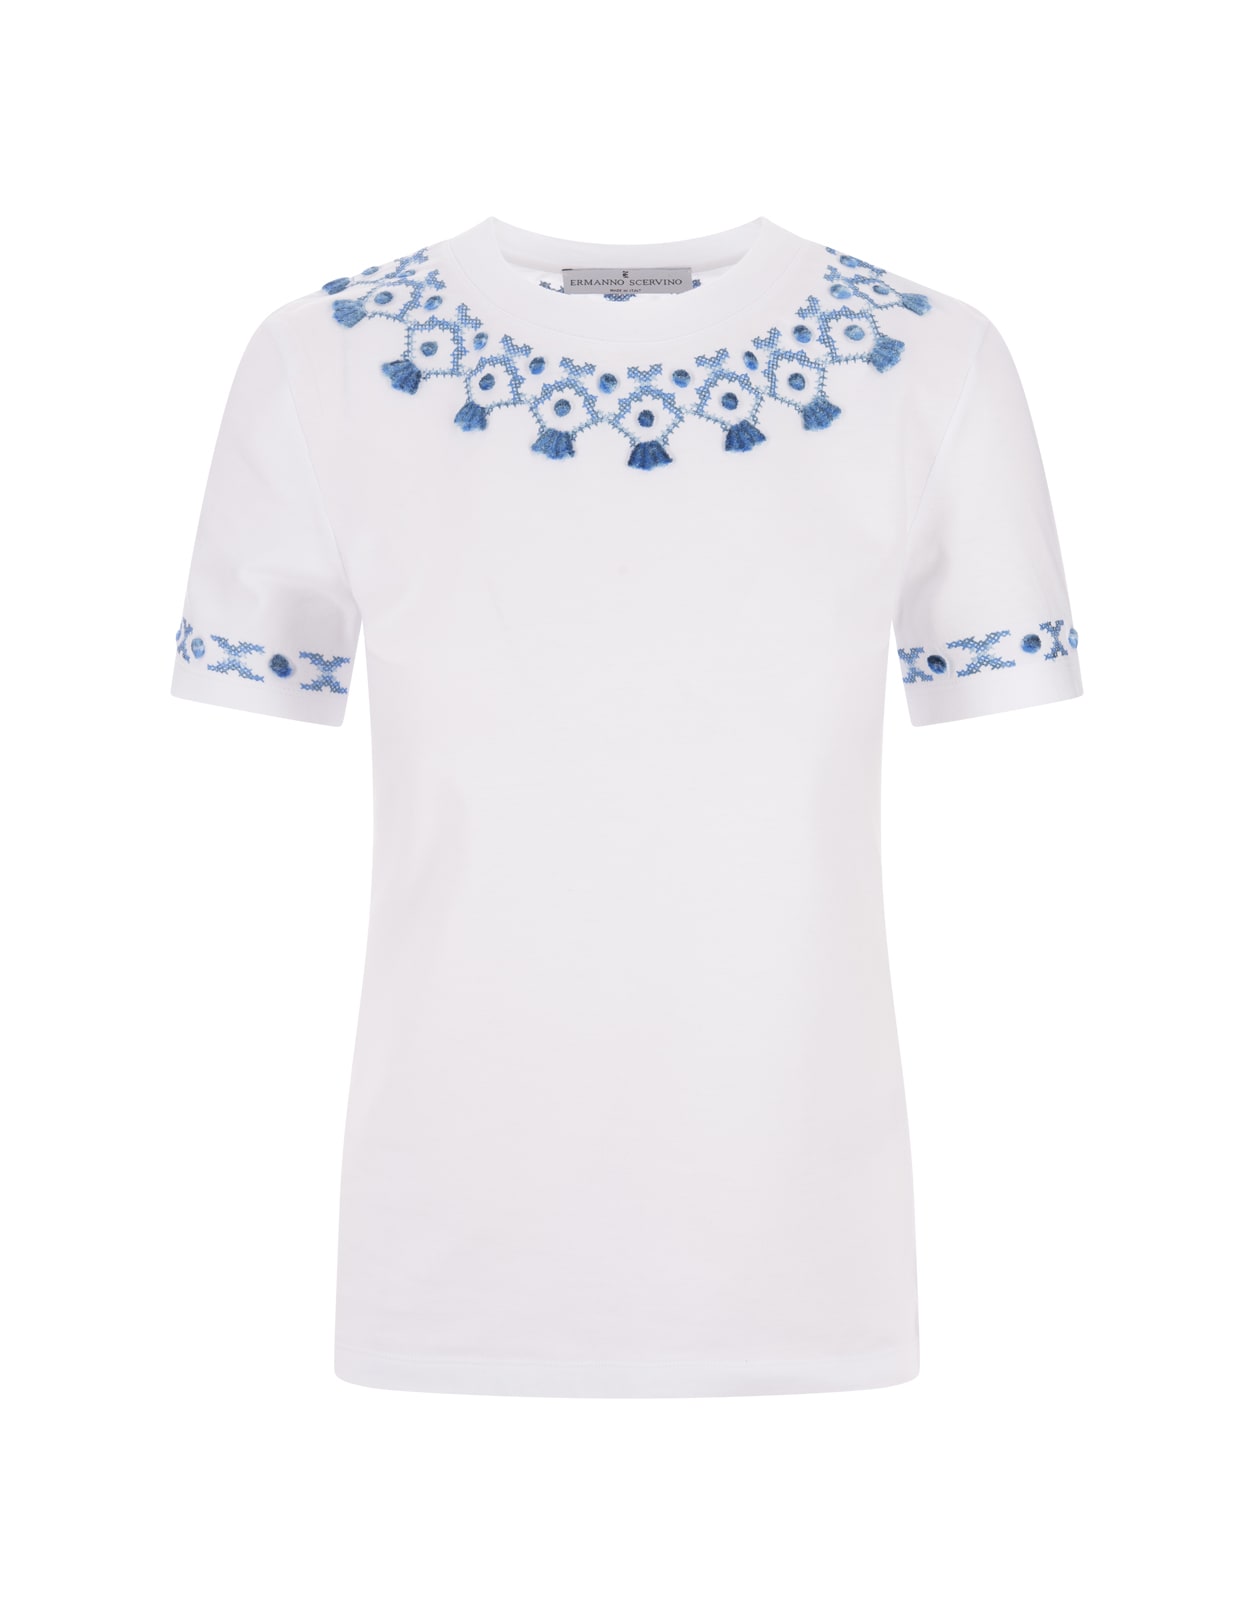 Ermanno Scervino White T-shirt With Blue Ethnic Embroidery